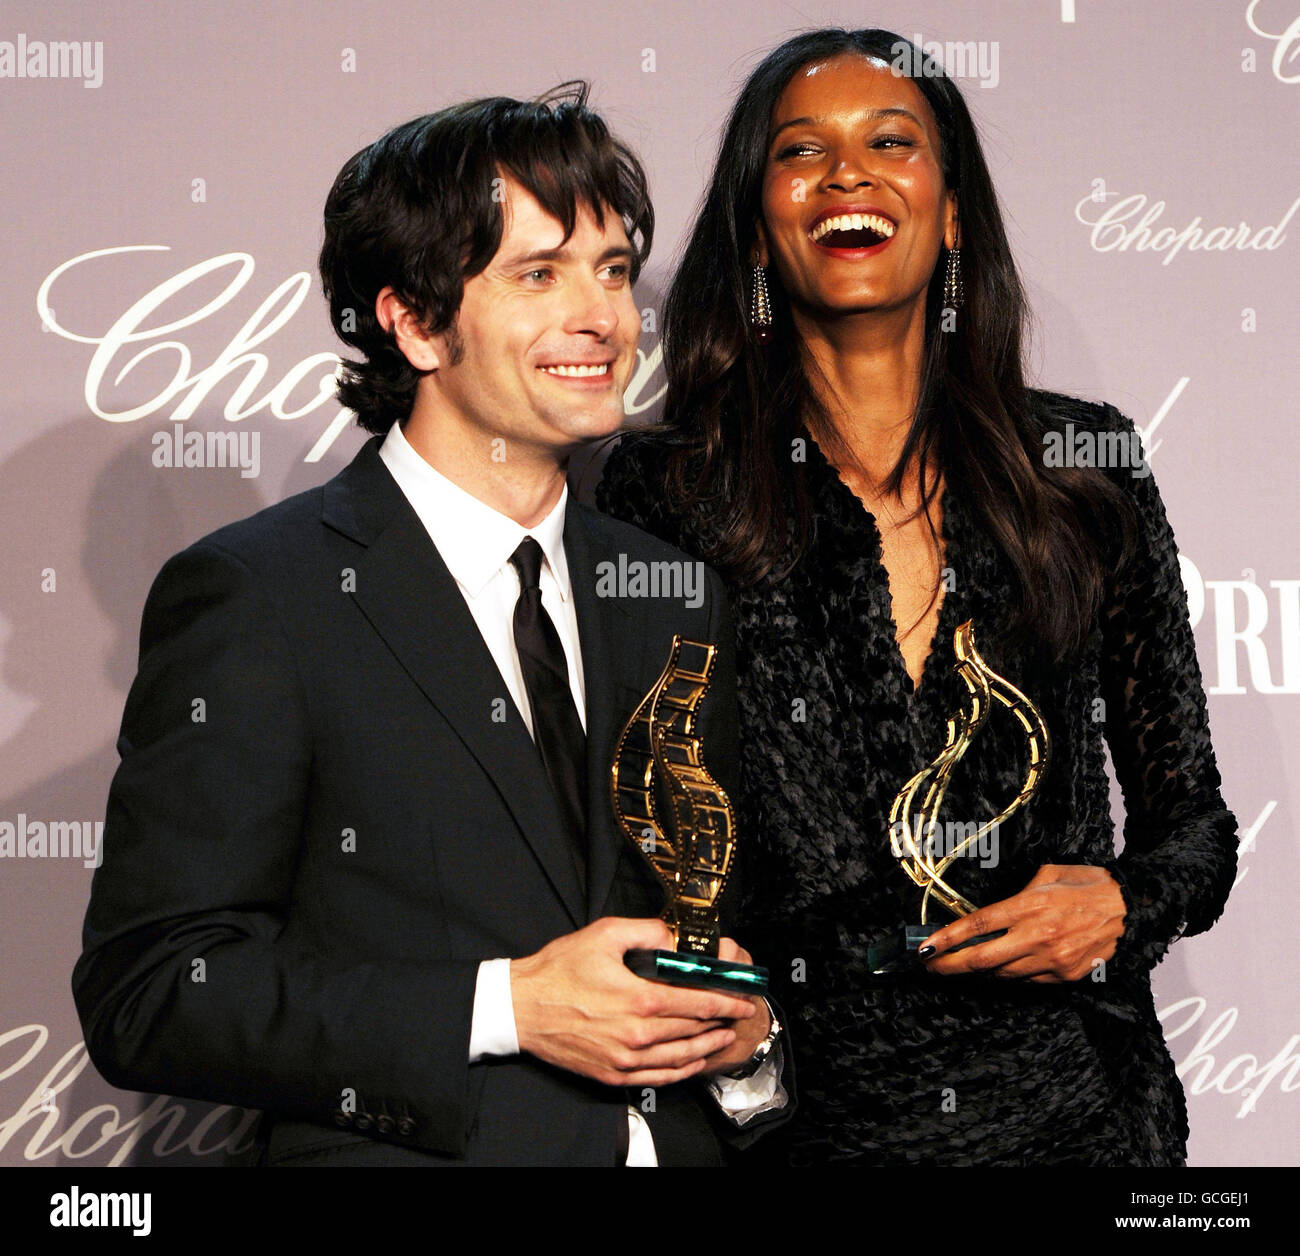 The winners of the 2010 Chopard Trophies for the best newcomer actor and actress, Edward Hogg and Liya Kebede, during the award ceremony on the second day of the Cannes Film Festival, France. Stock Photo